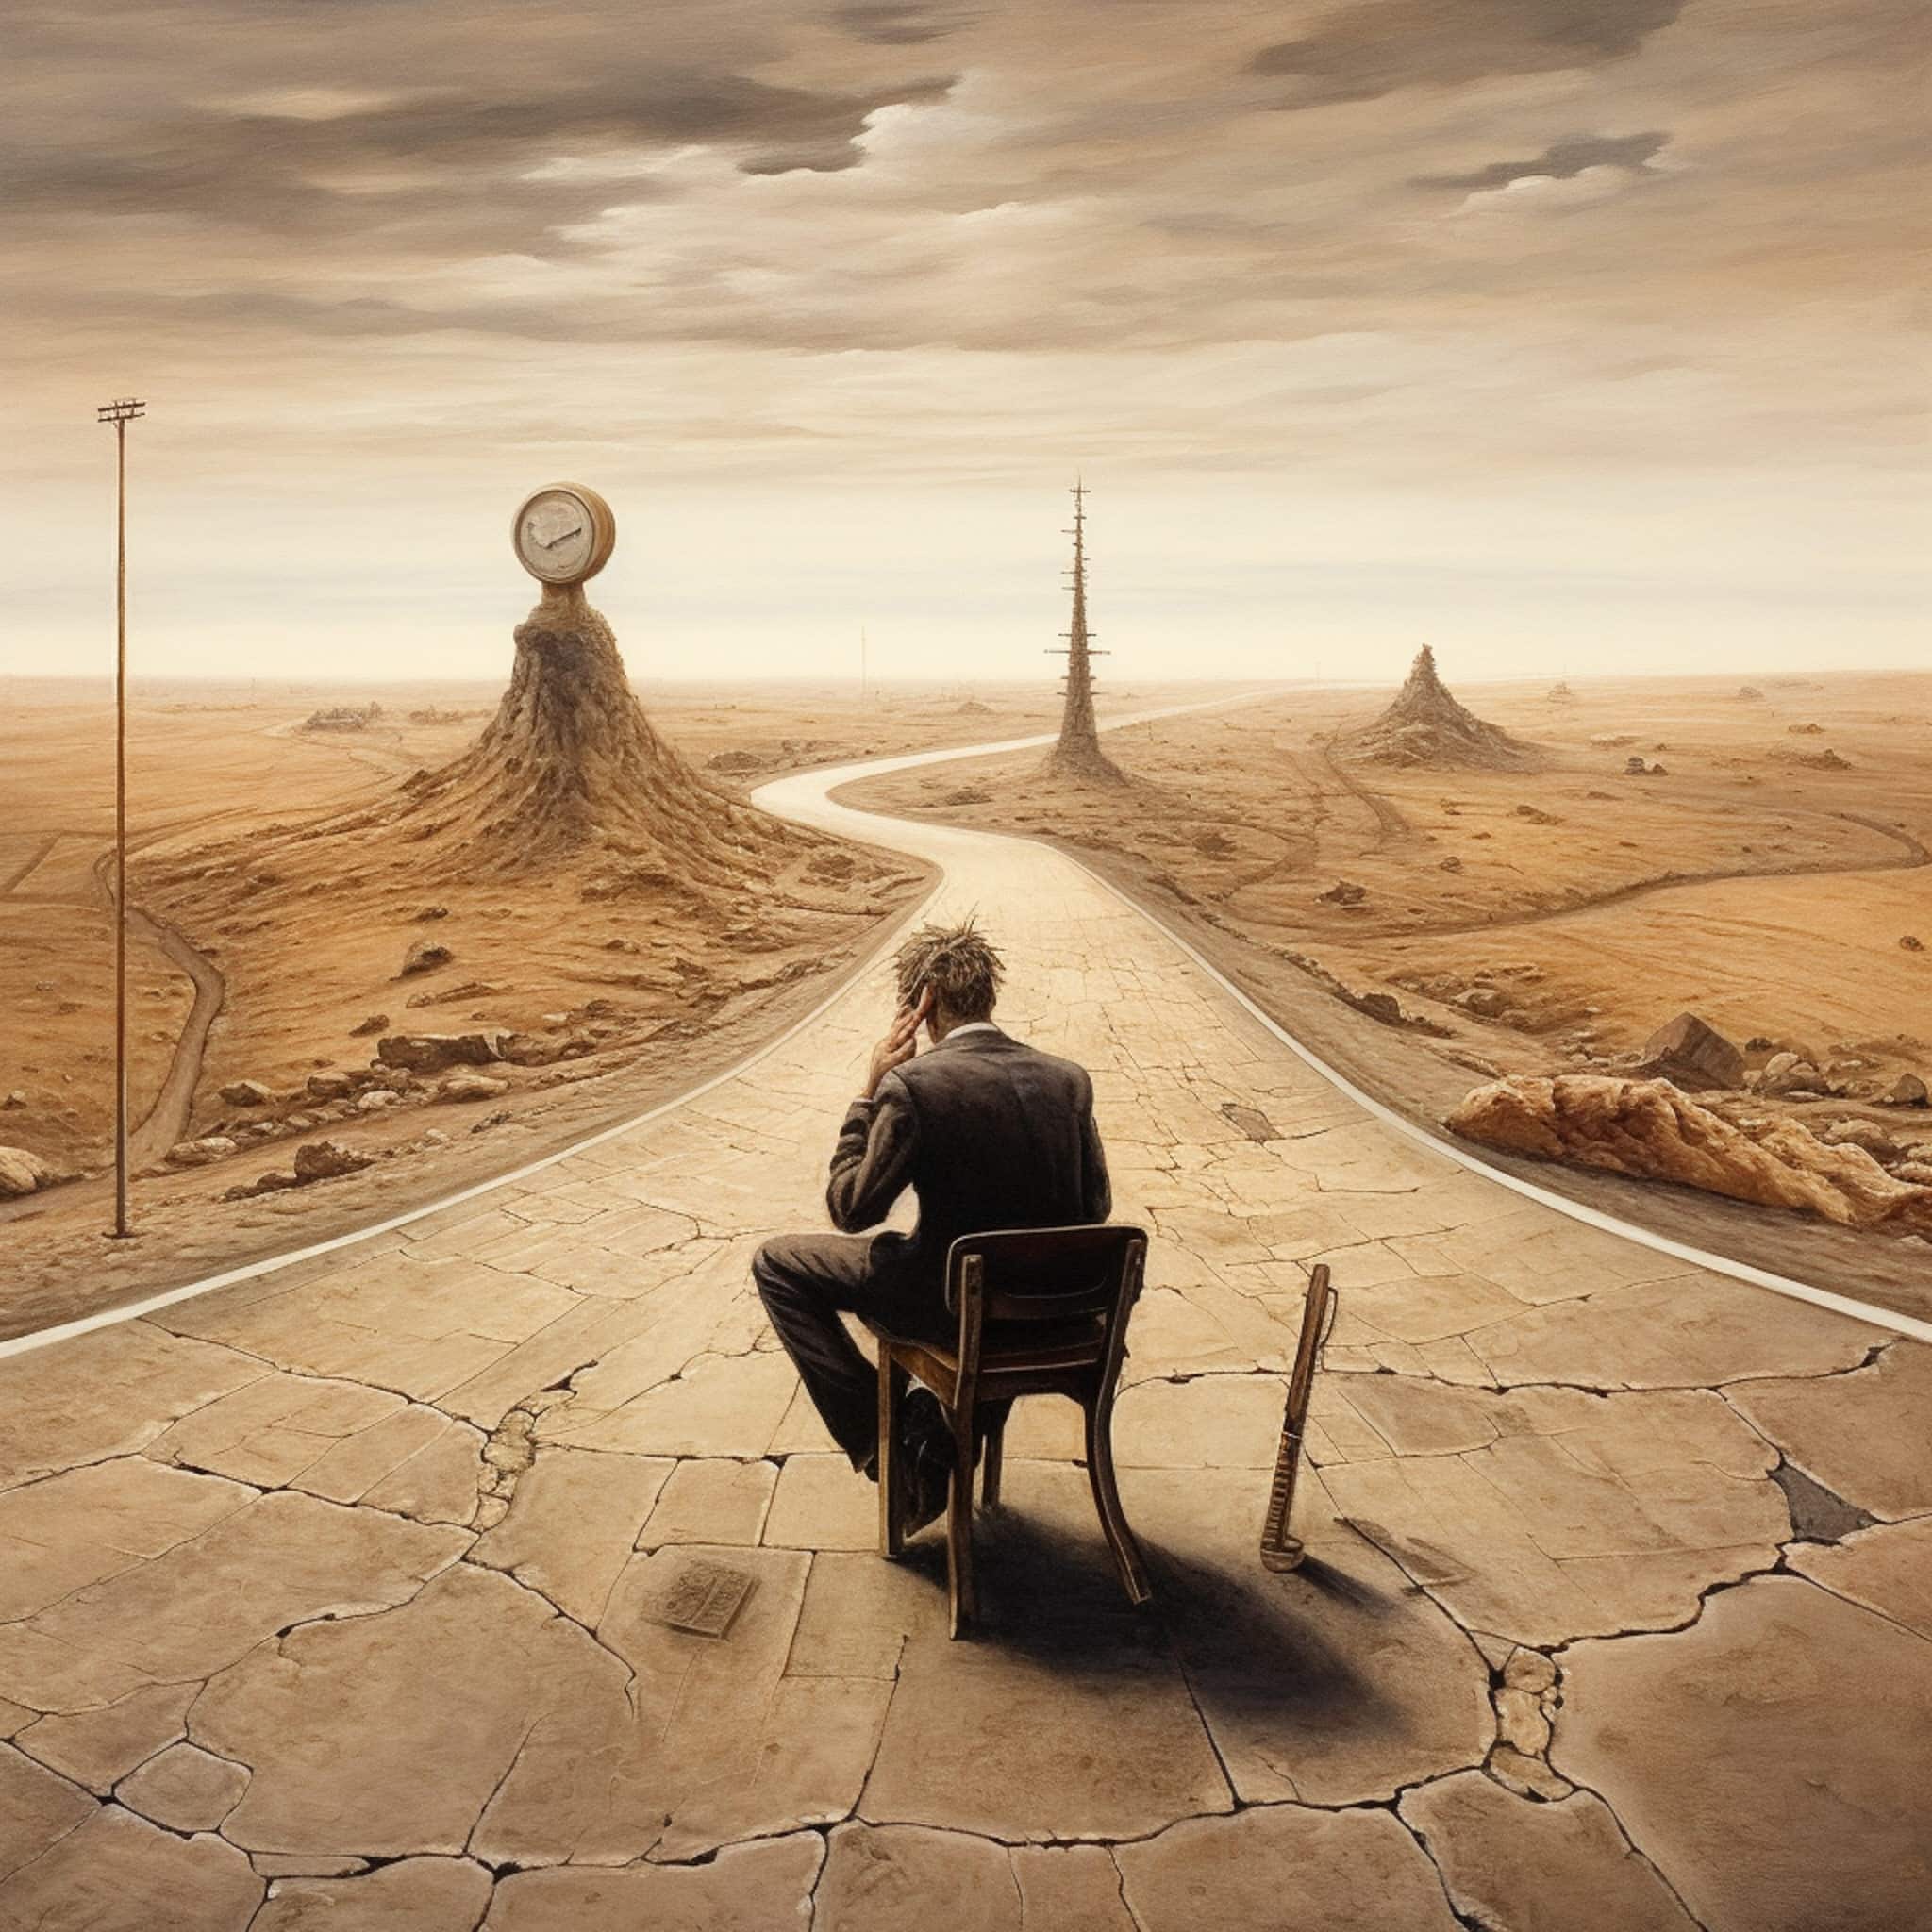 vecteezy there is a man sitting on a bench in the middle of a desert 28400036